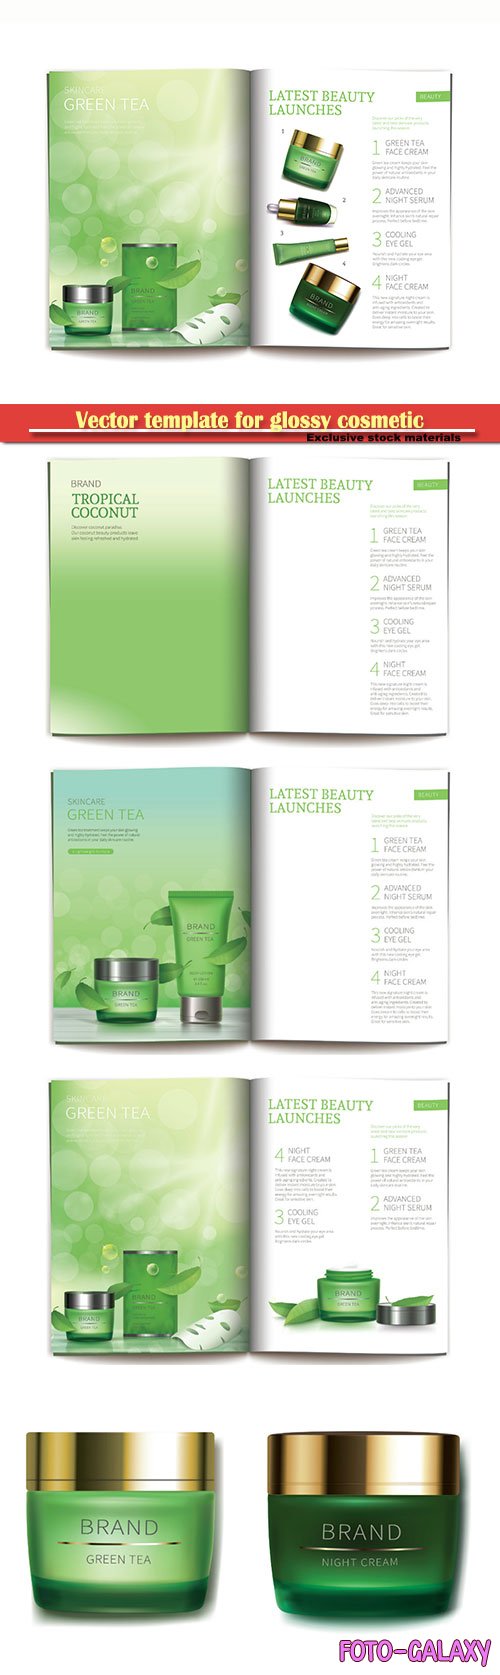 Vector template for glossy cosmetic magazine with natural cosmetics 